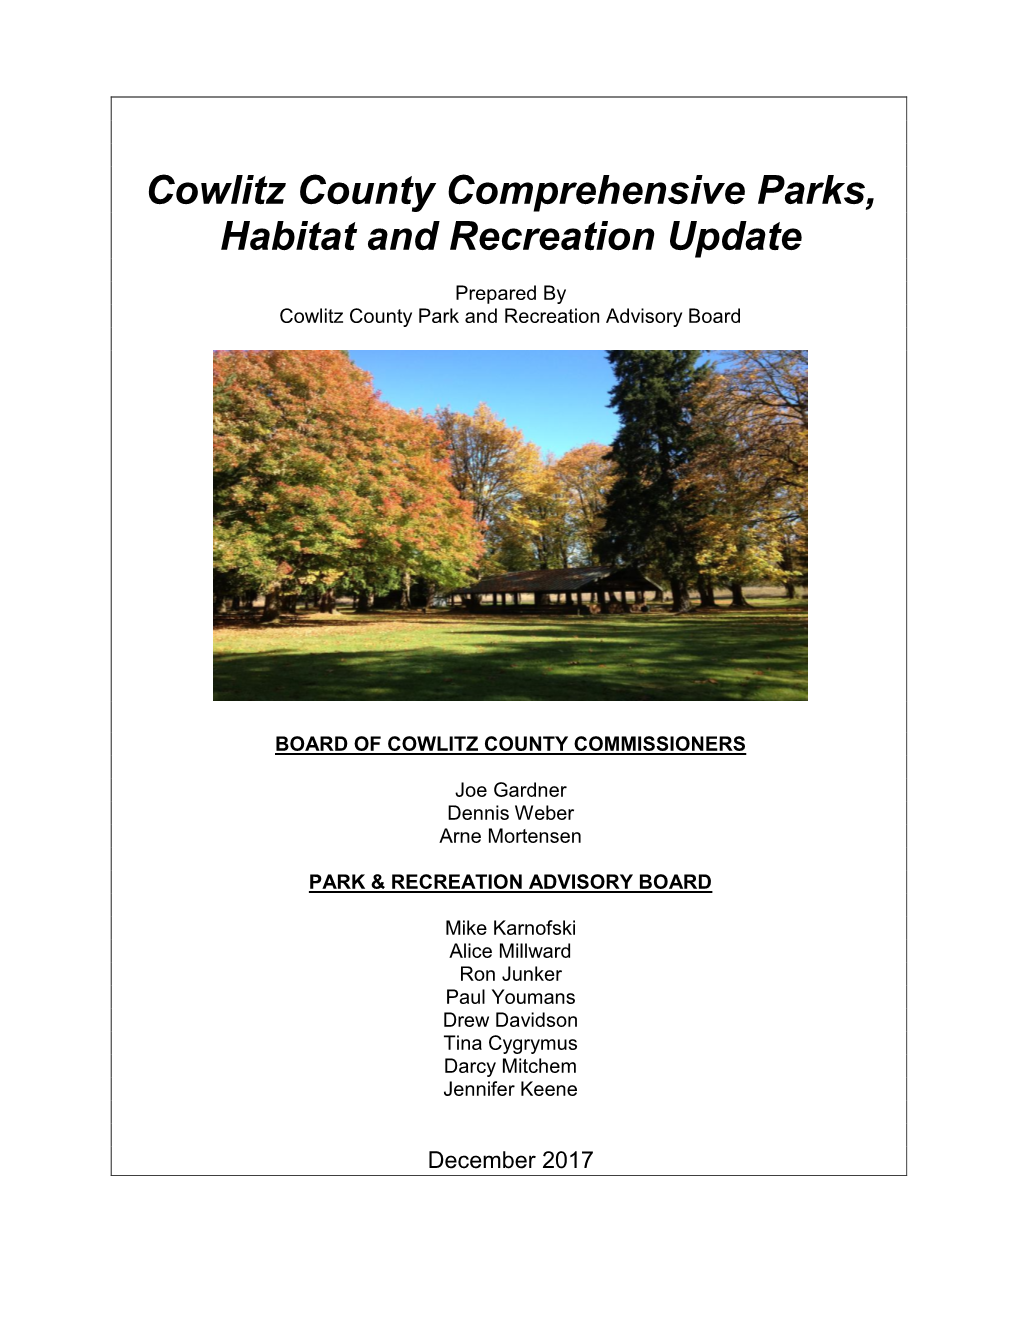 Cowlitz County Comprehensive Parks, Habitat and Recreation Update